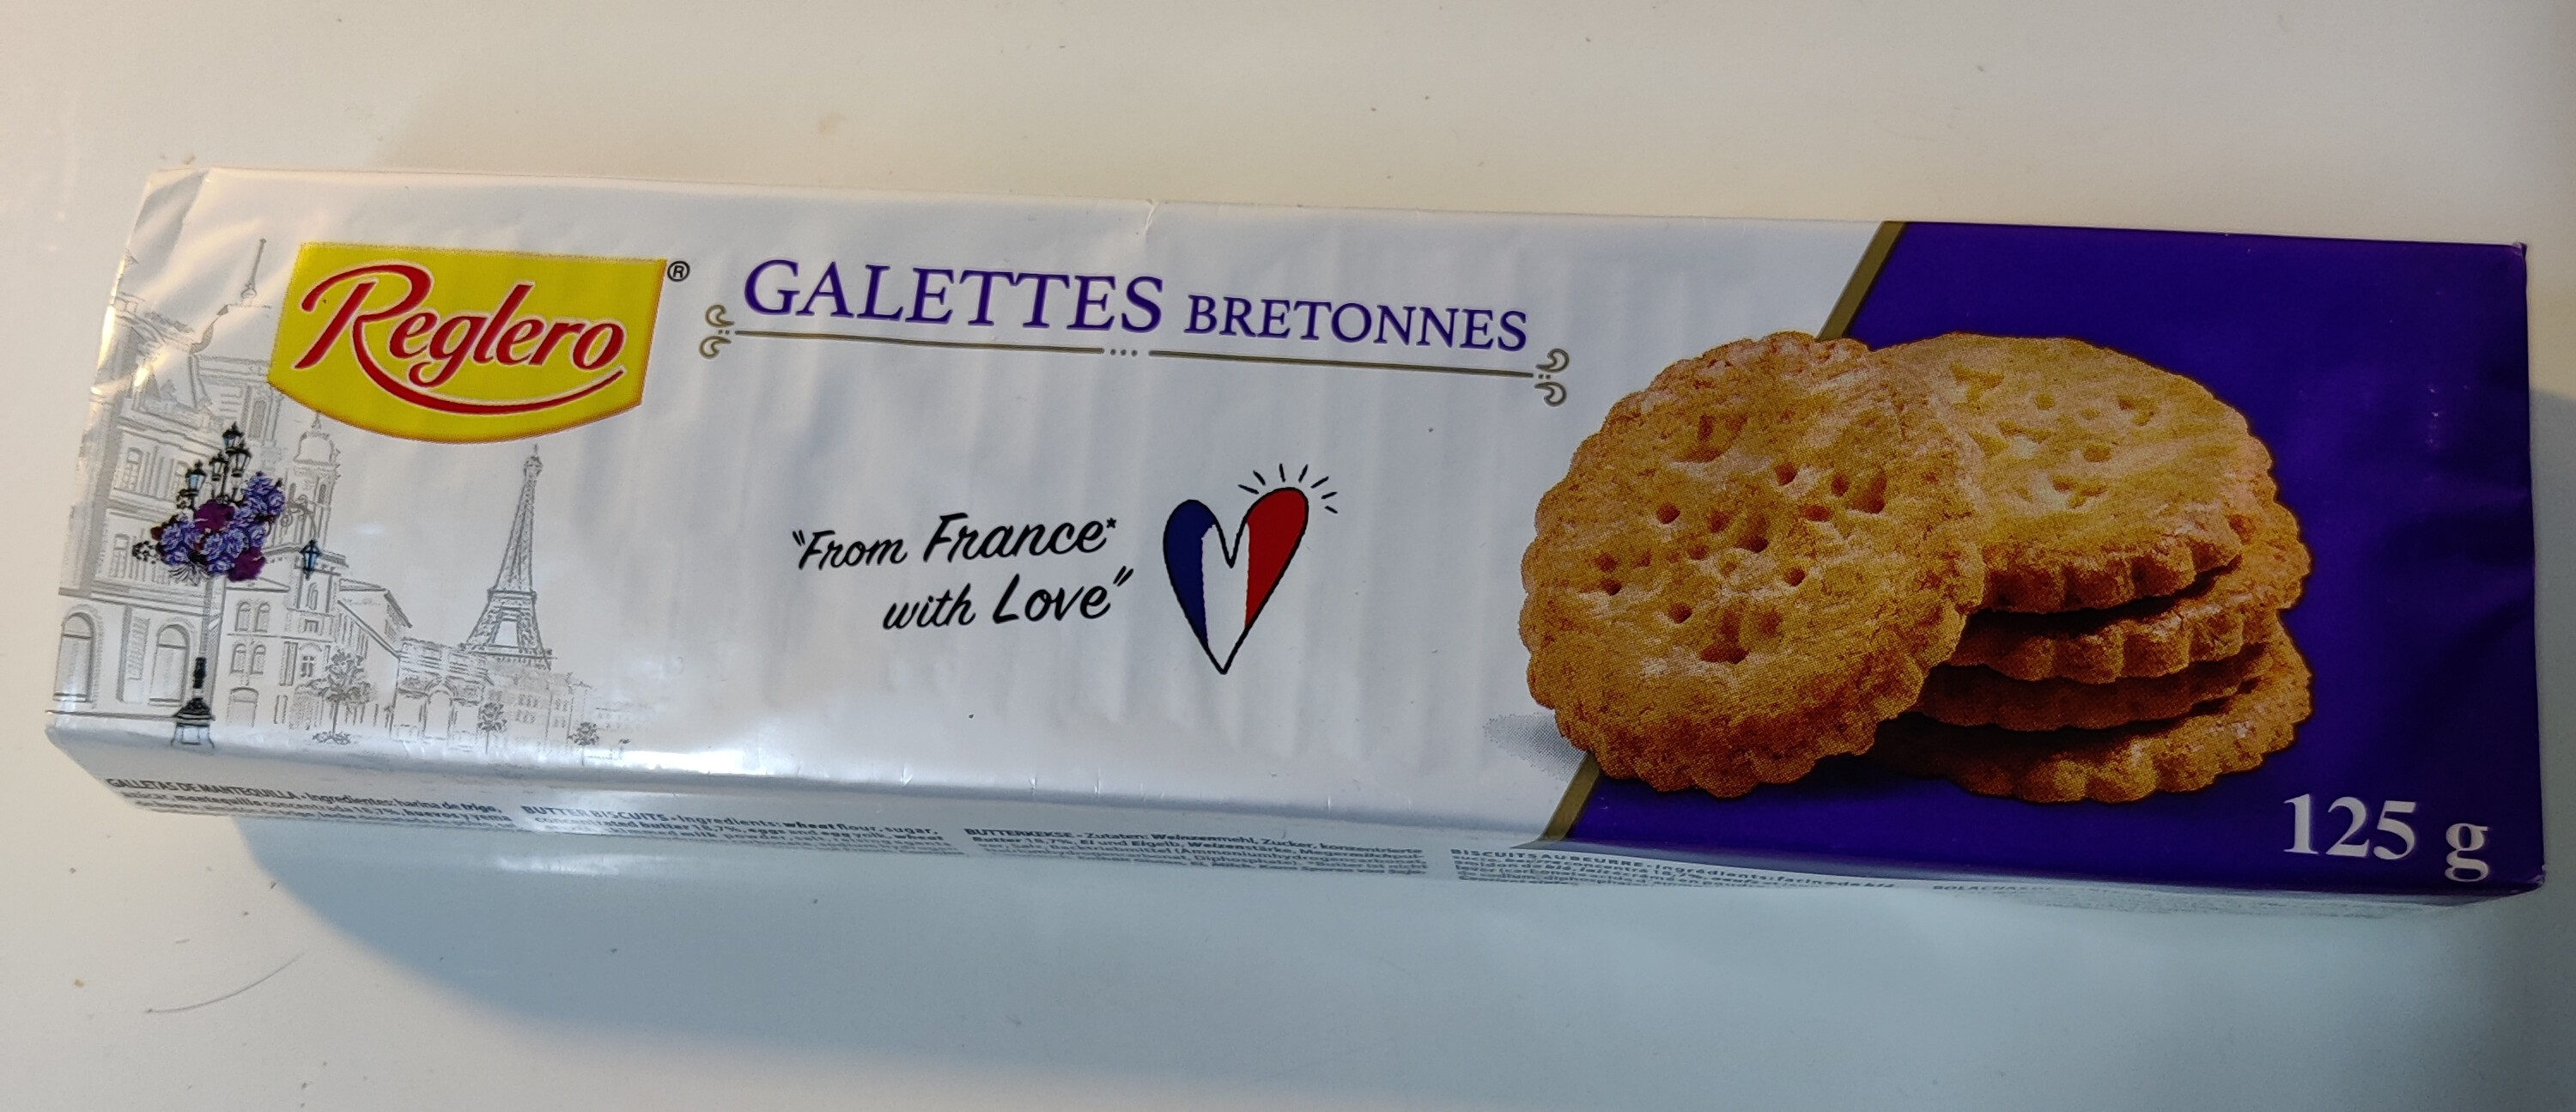 Butter Biscuits Bretons - Producto - en